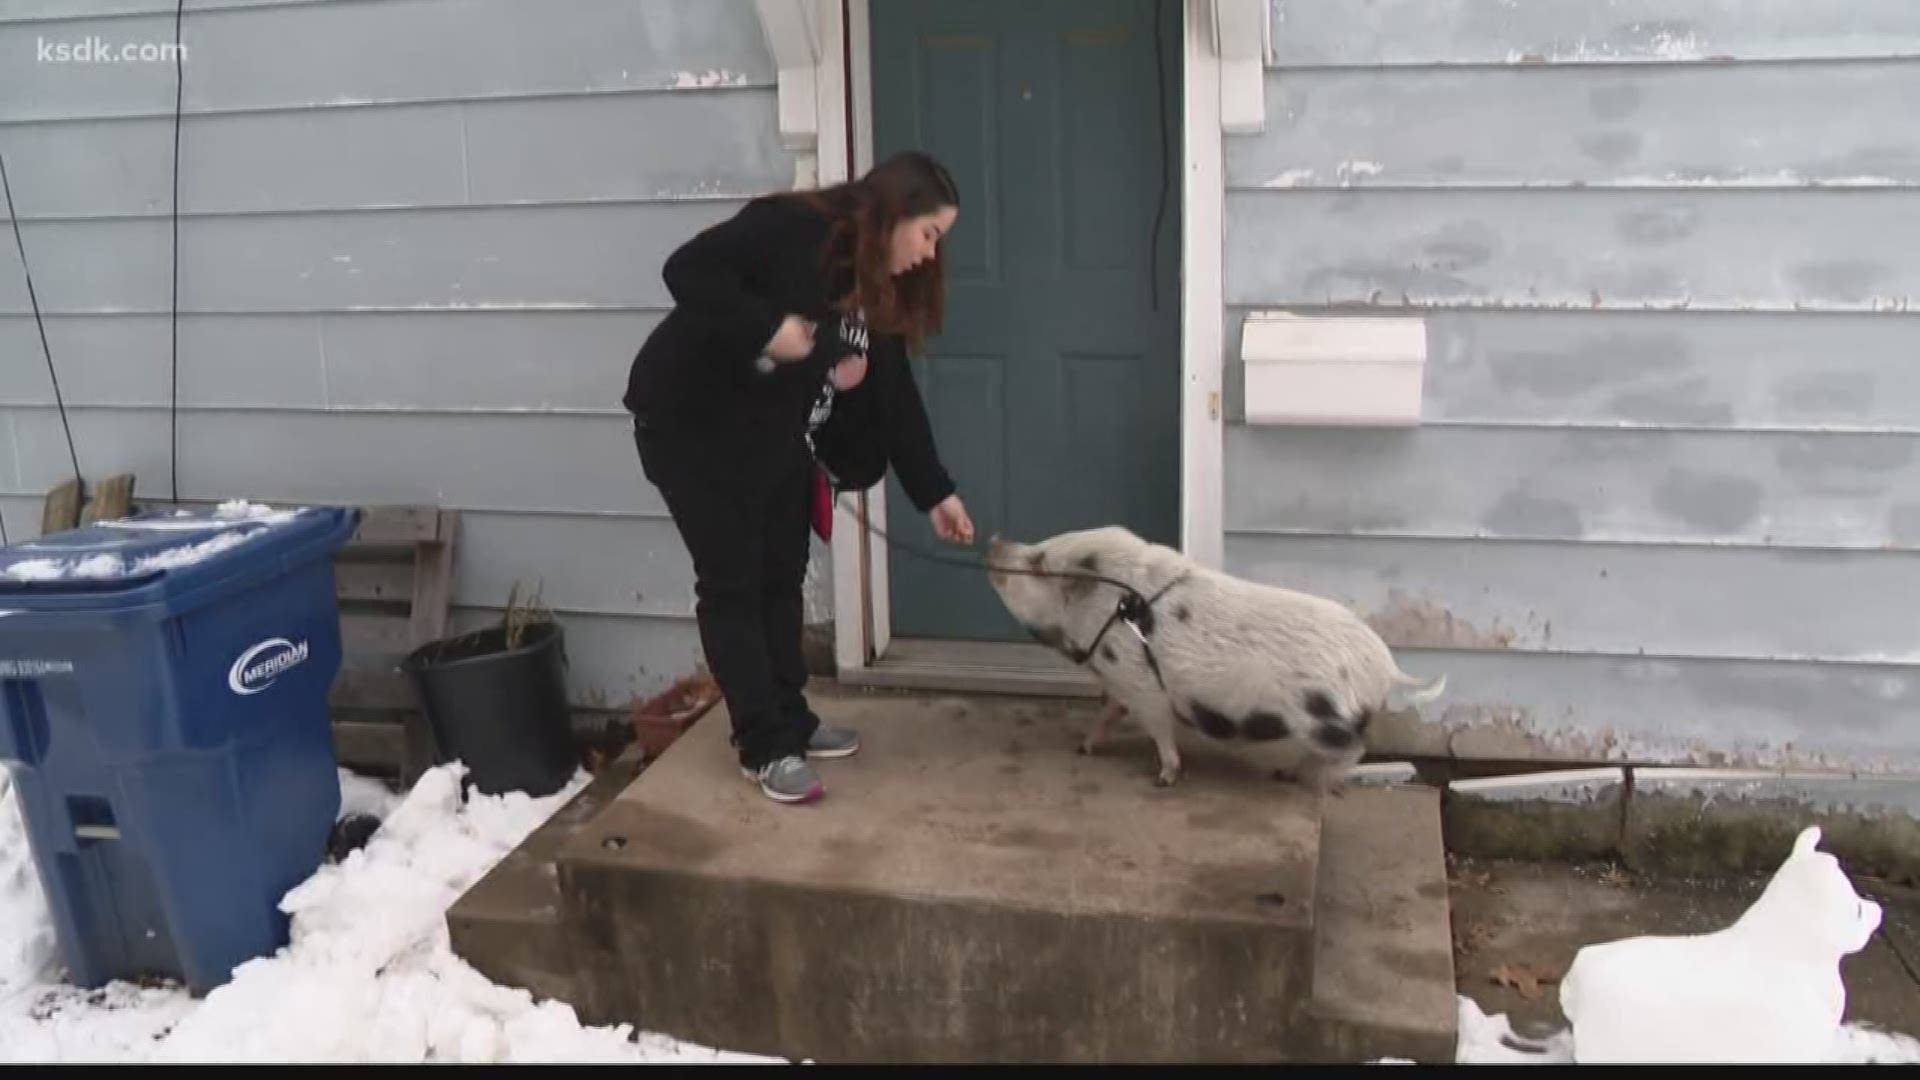 Amber lives in Lemay with her emotional support pet pig Hector. Last week, she went to grab Hector's leash, harness and wagon only to learn it had all been stolen.